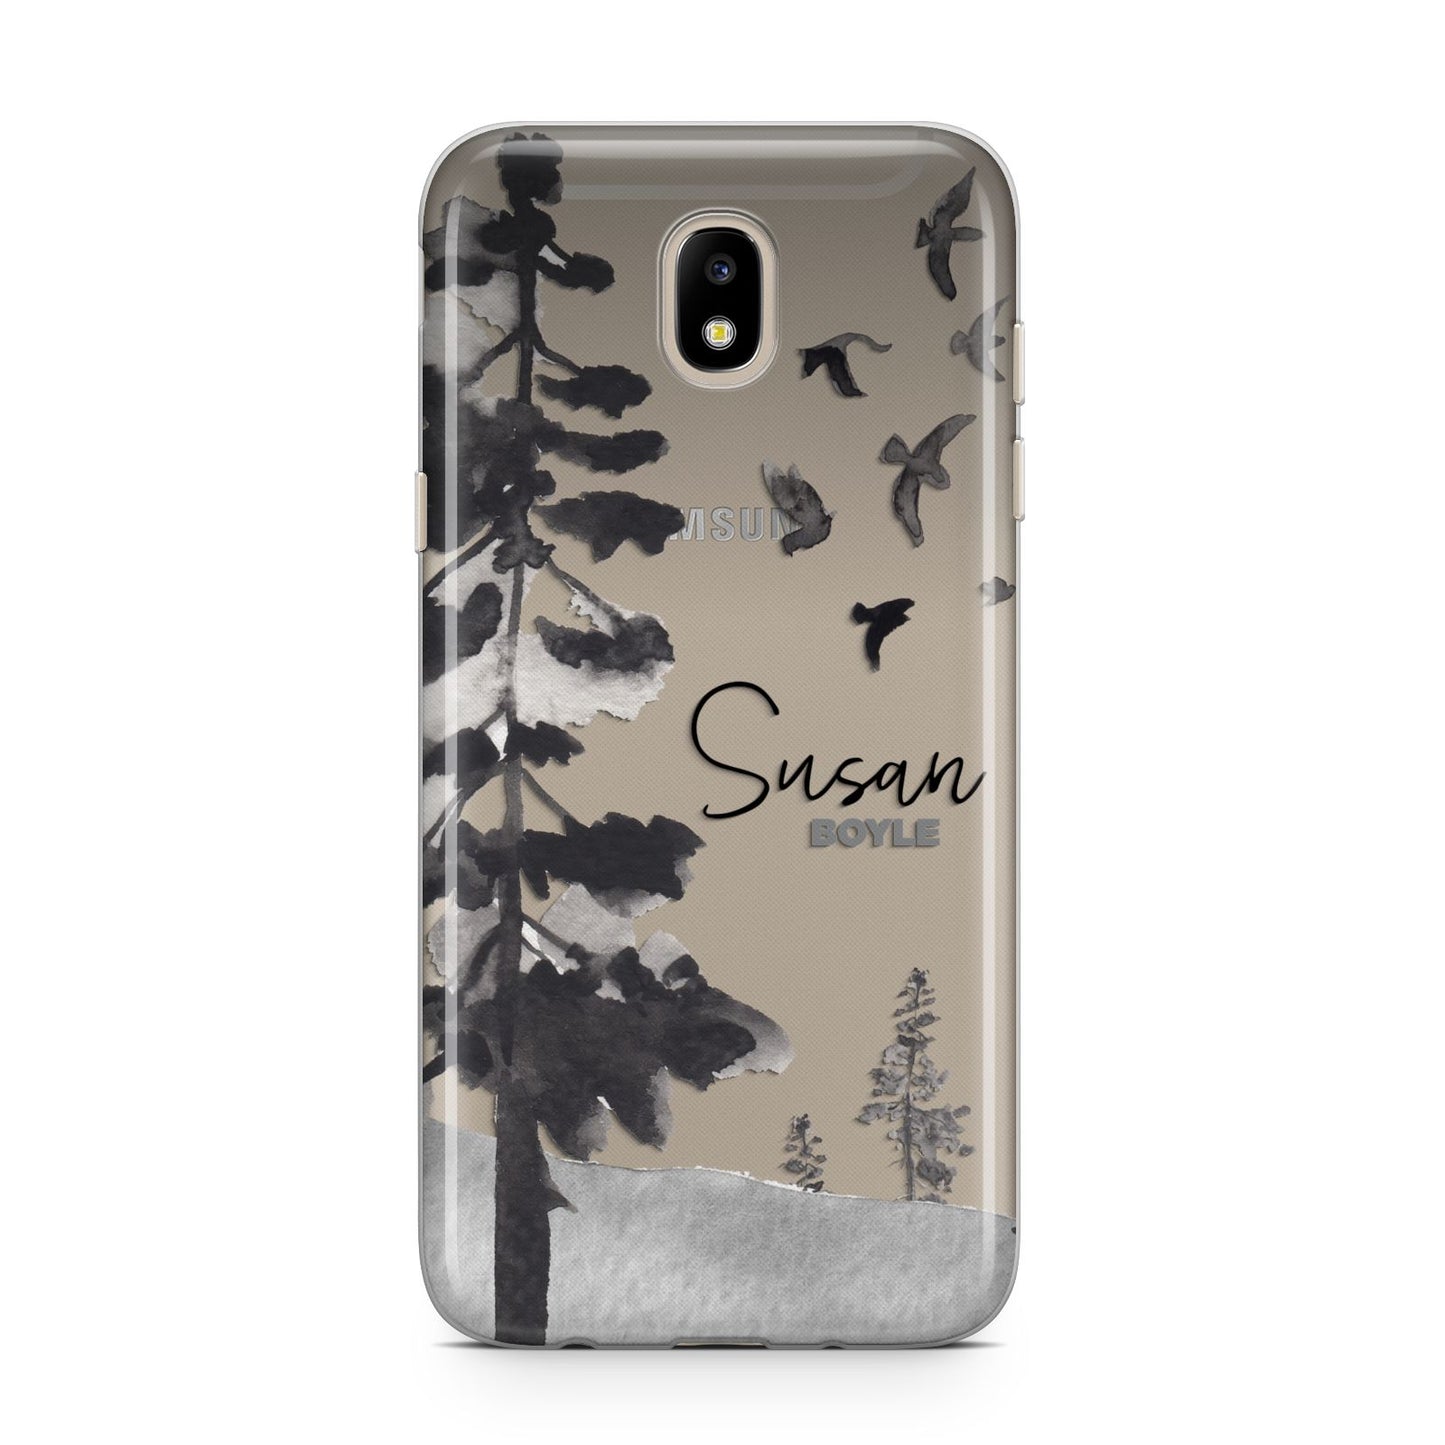 Personalised Monochrome Forest Samsung J5 2017 Case